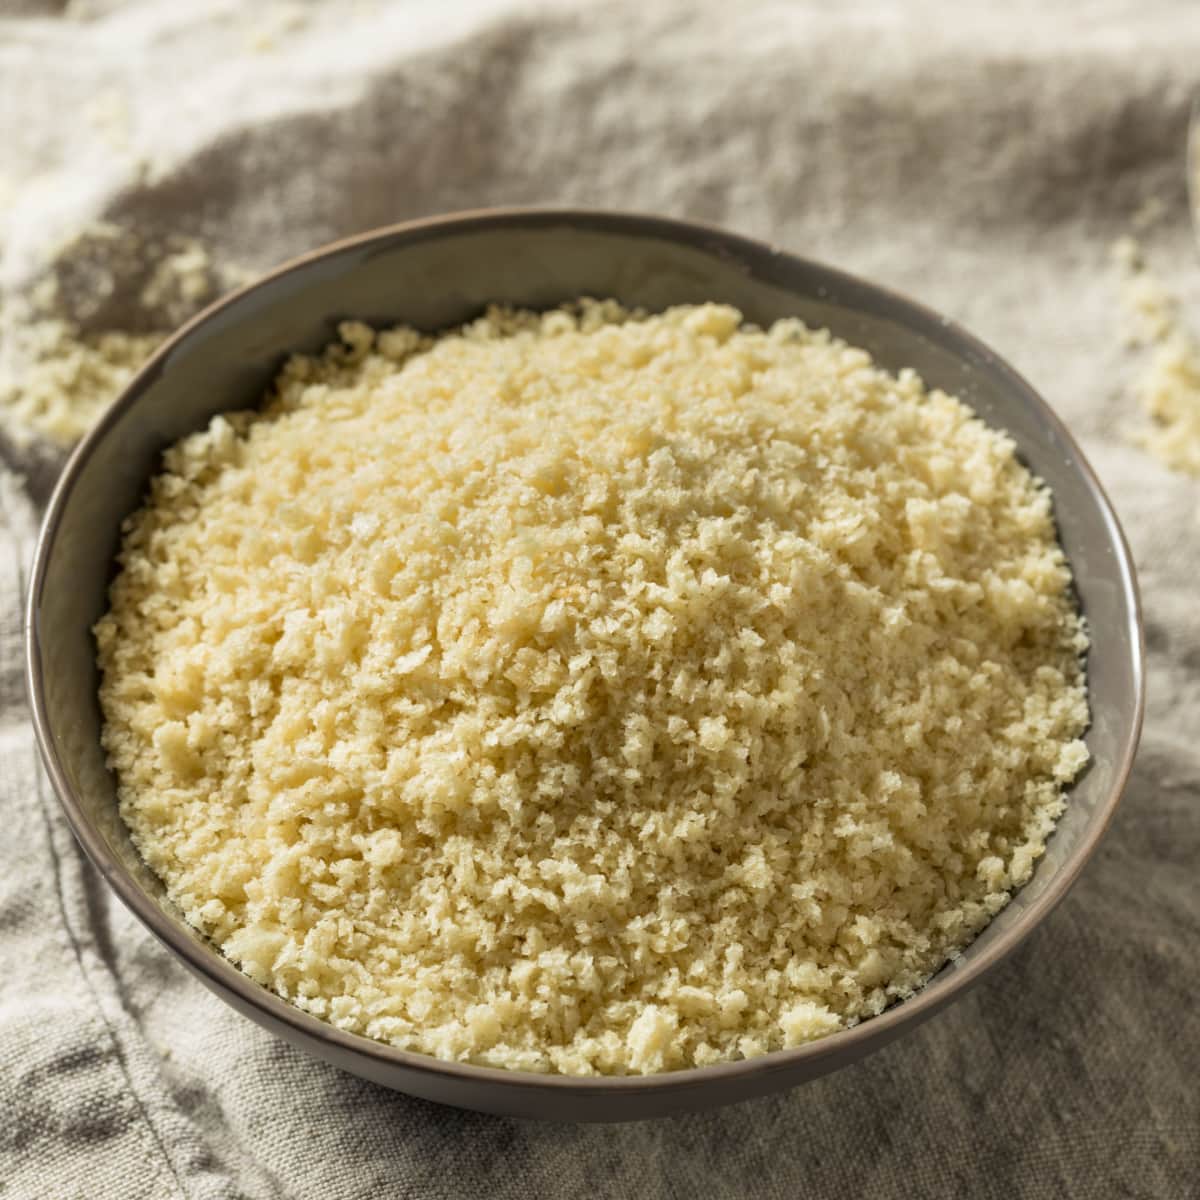 Panko Crumbs in a Bowl on a White Cloth